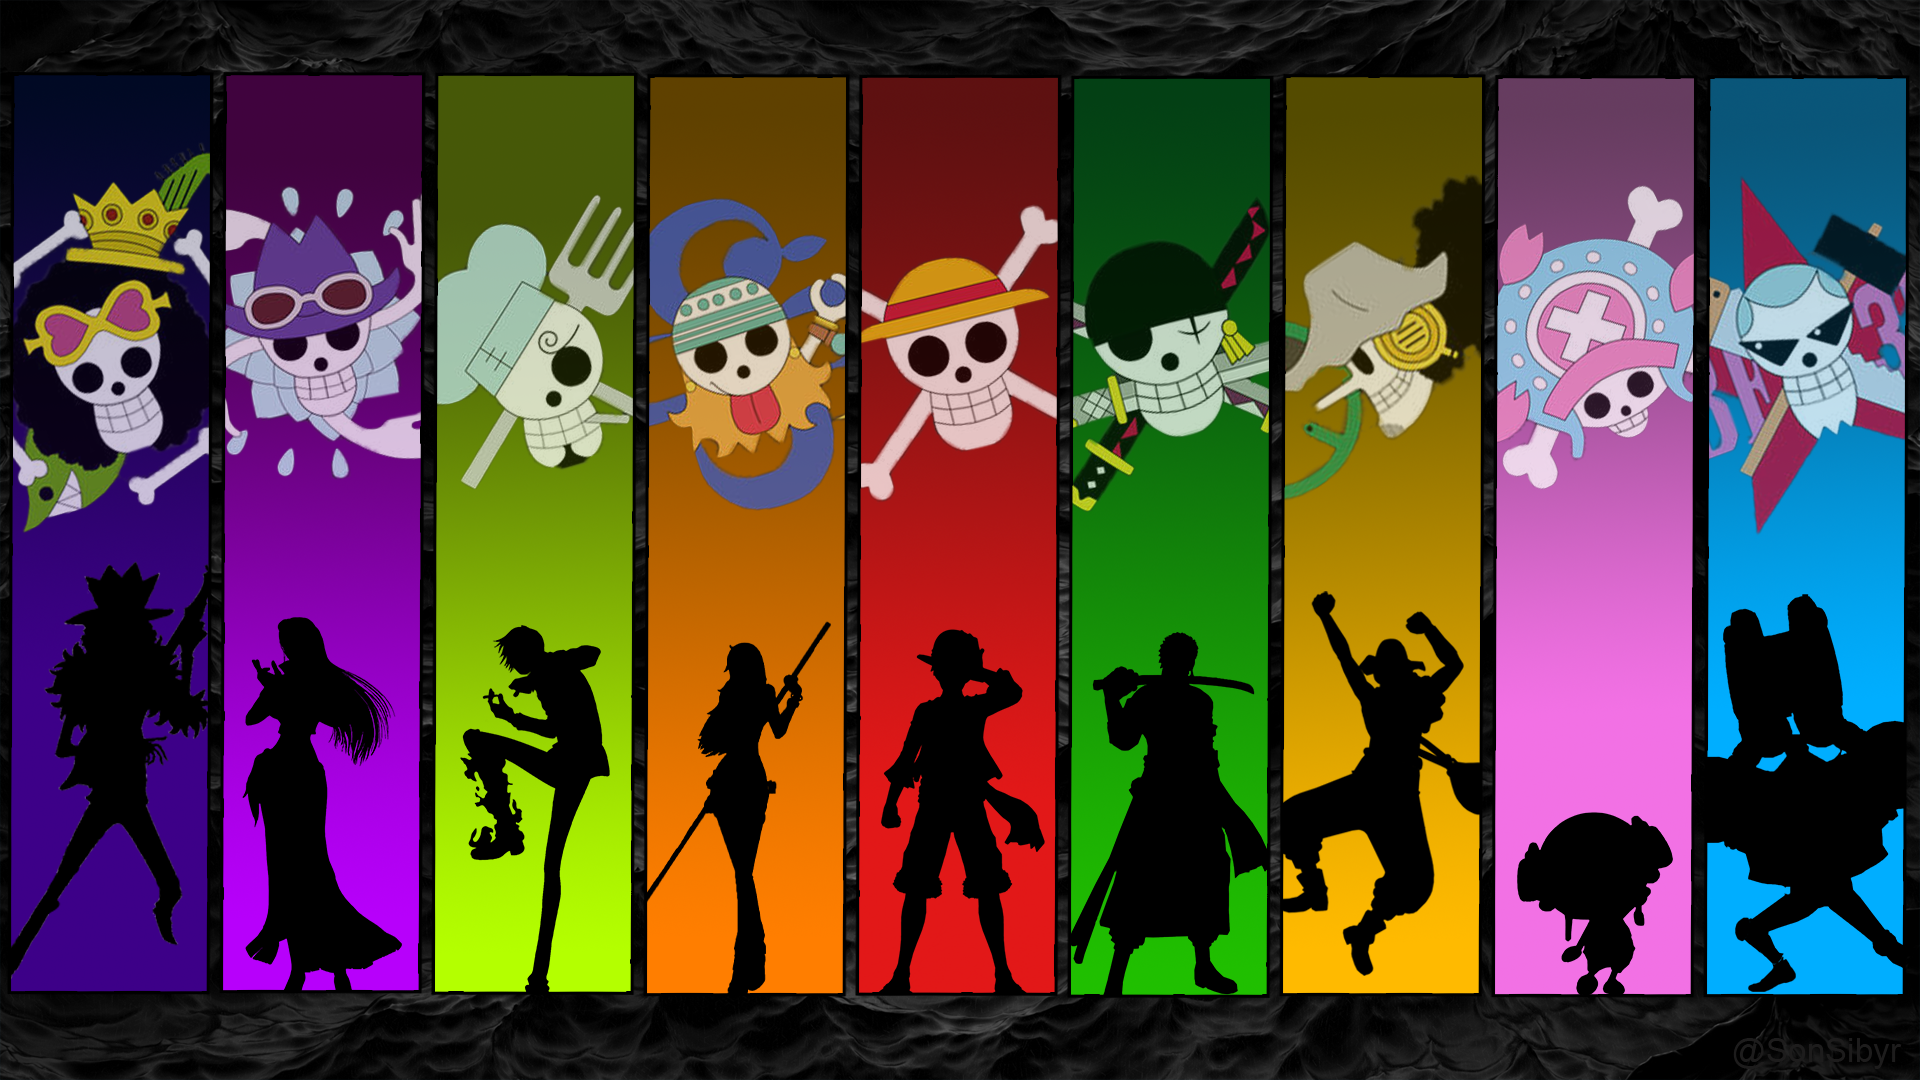 Here's a StrawHat crew wallpaper/screensaver I made. 